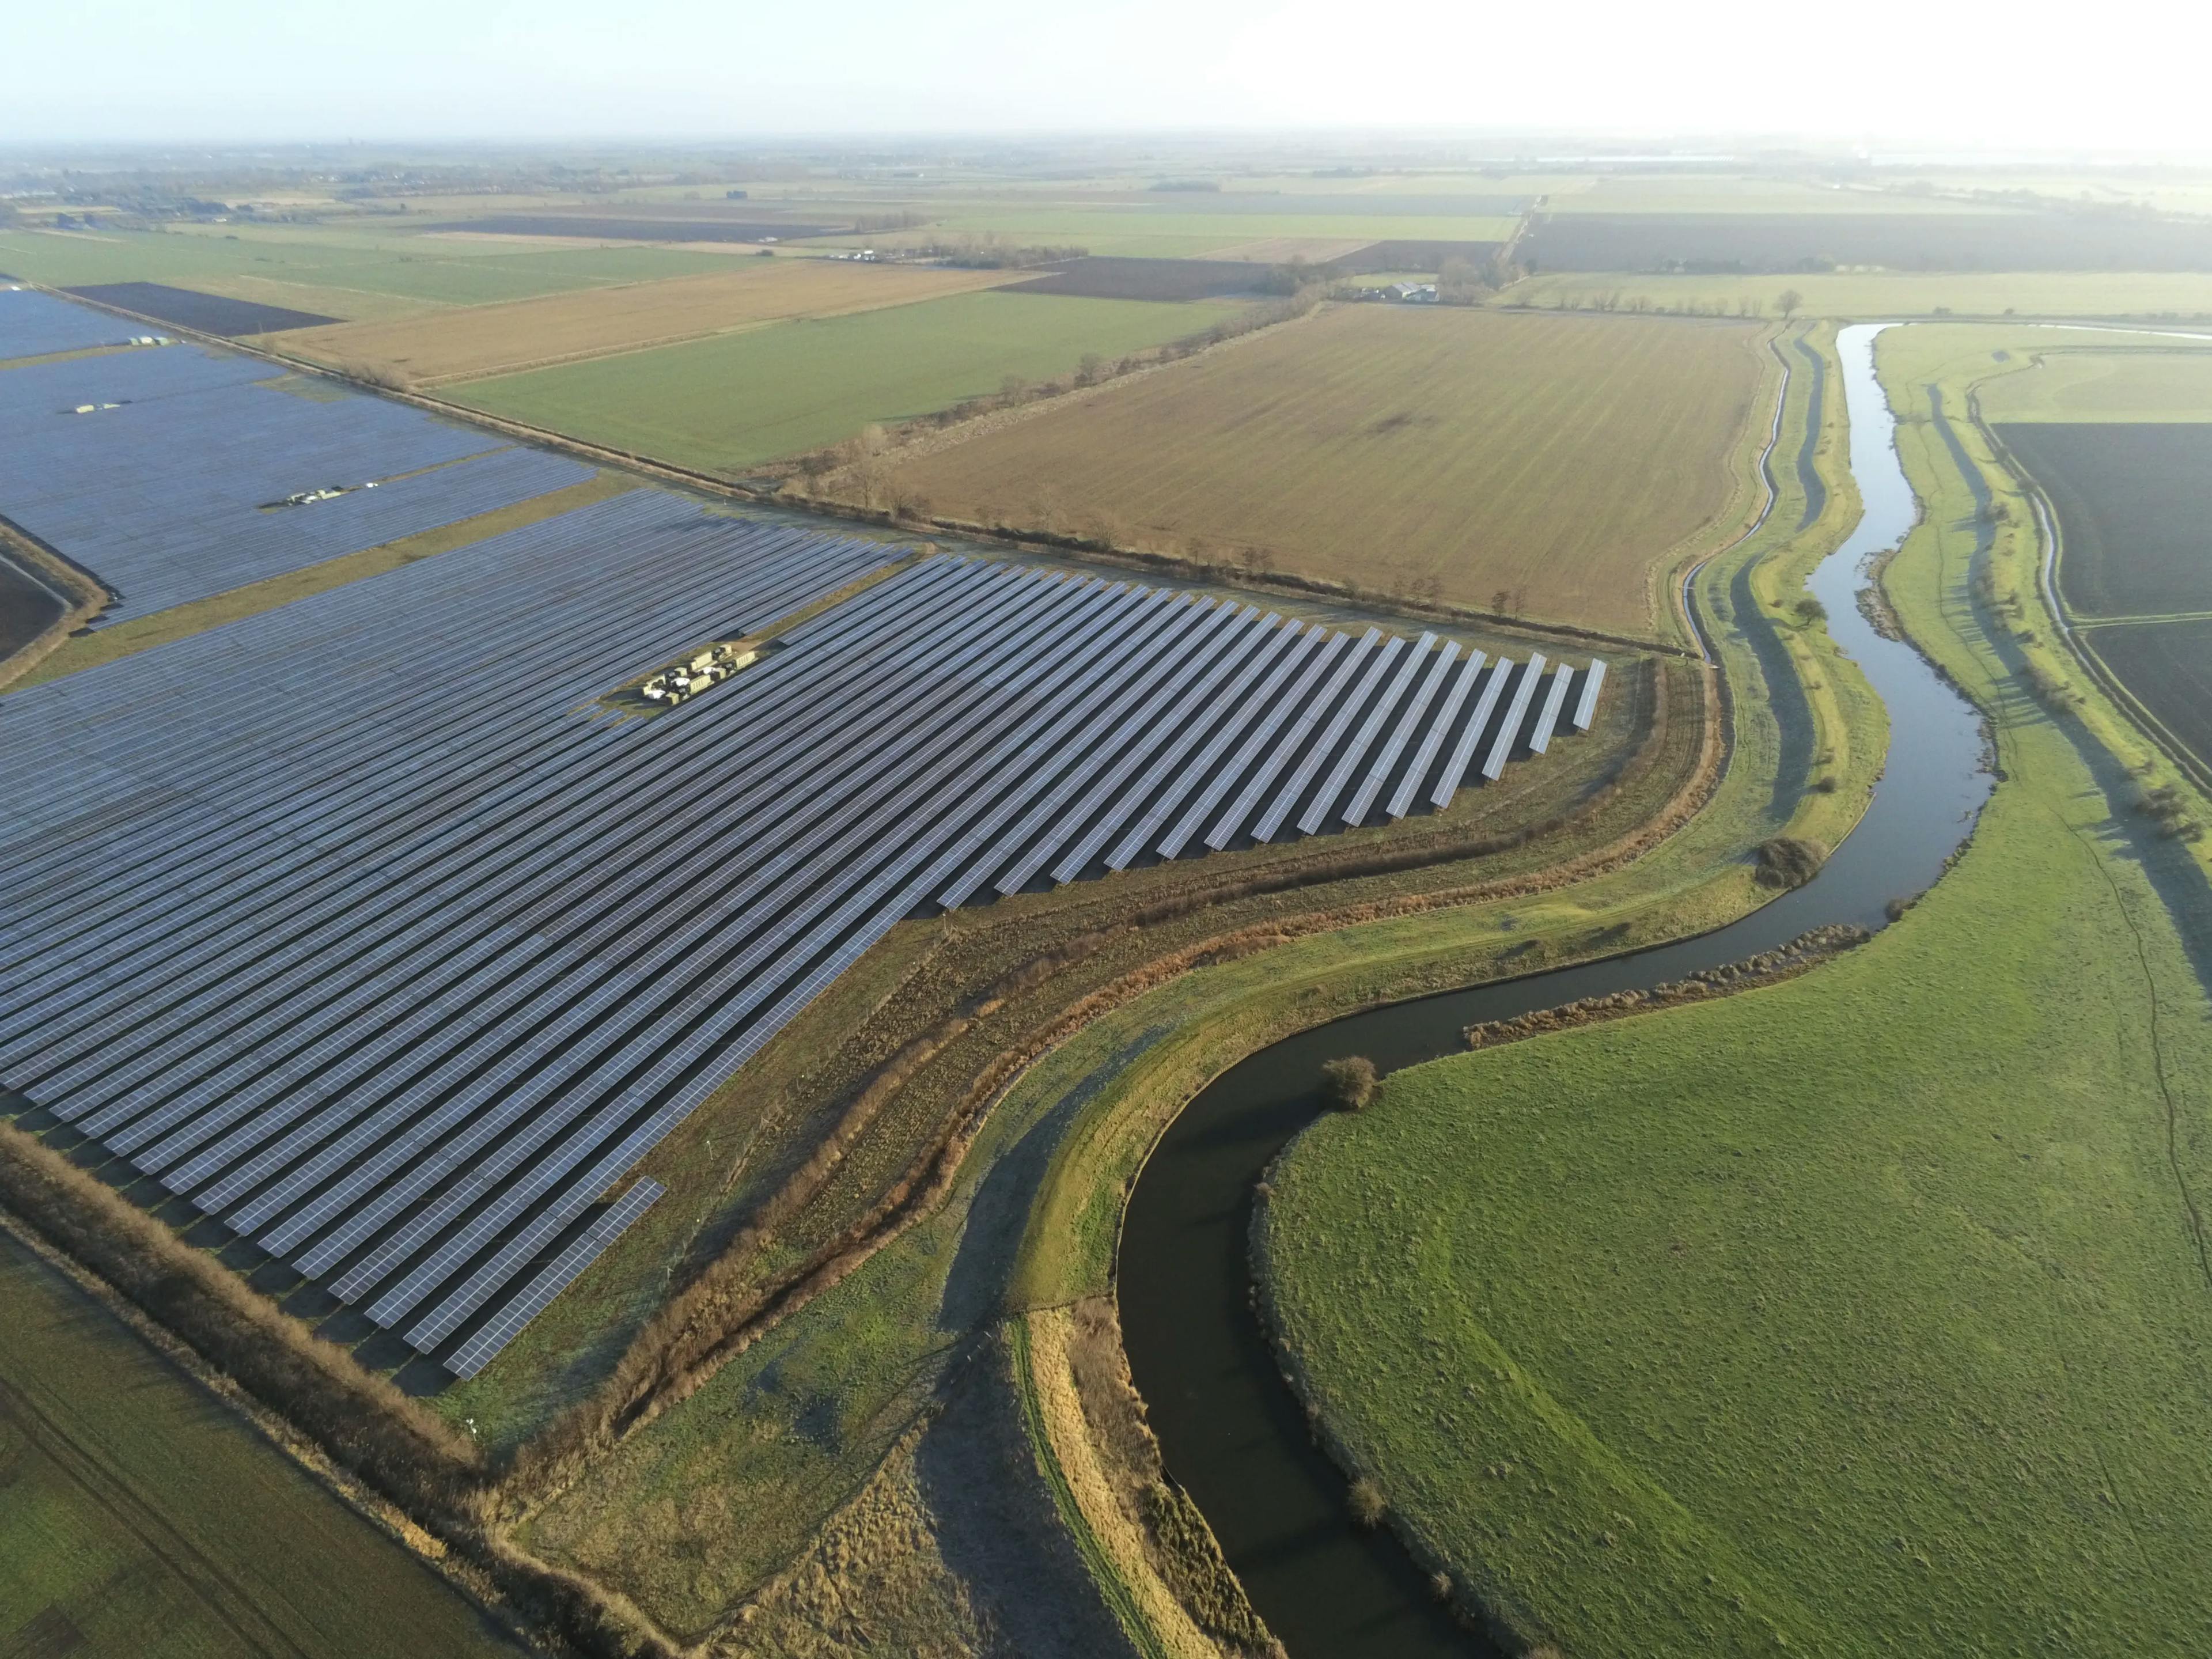 A solar farm by a river, taken from a height